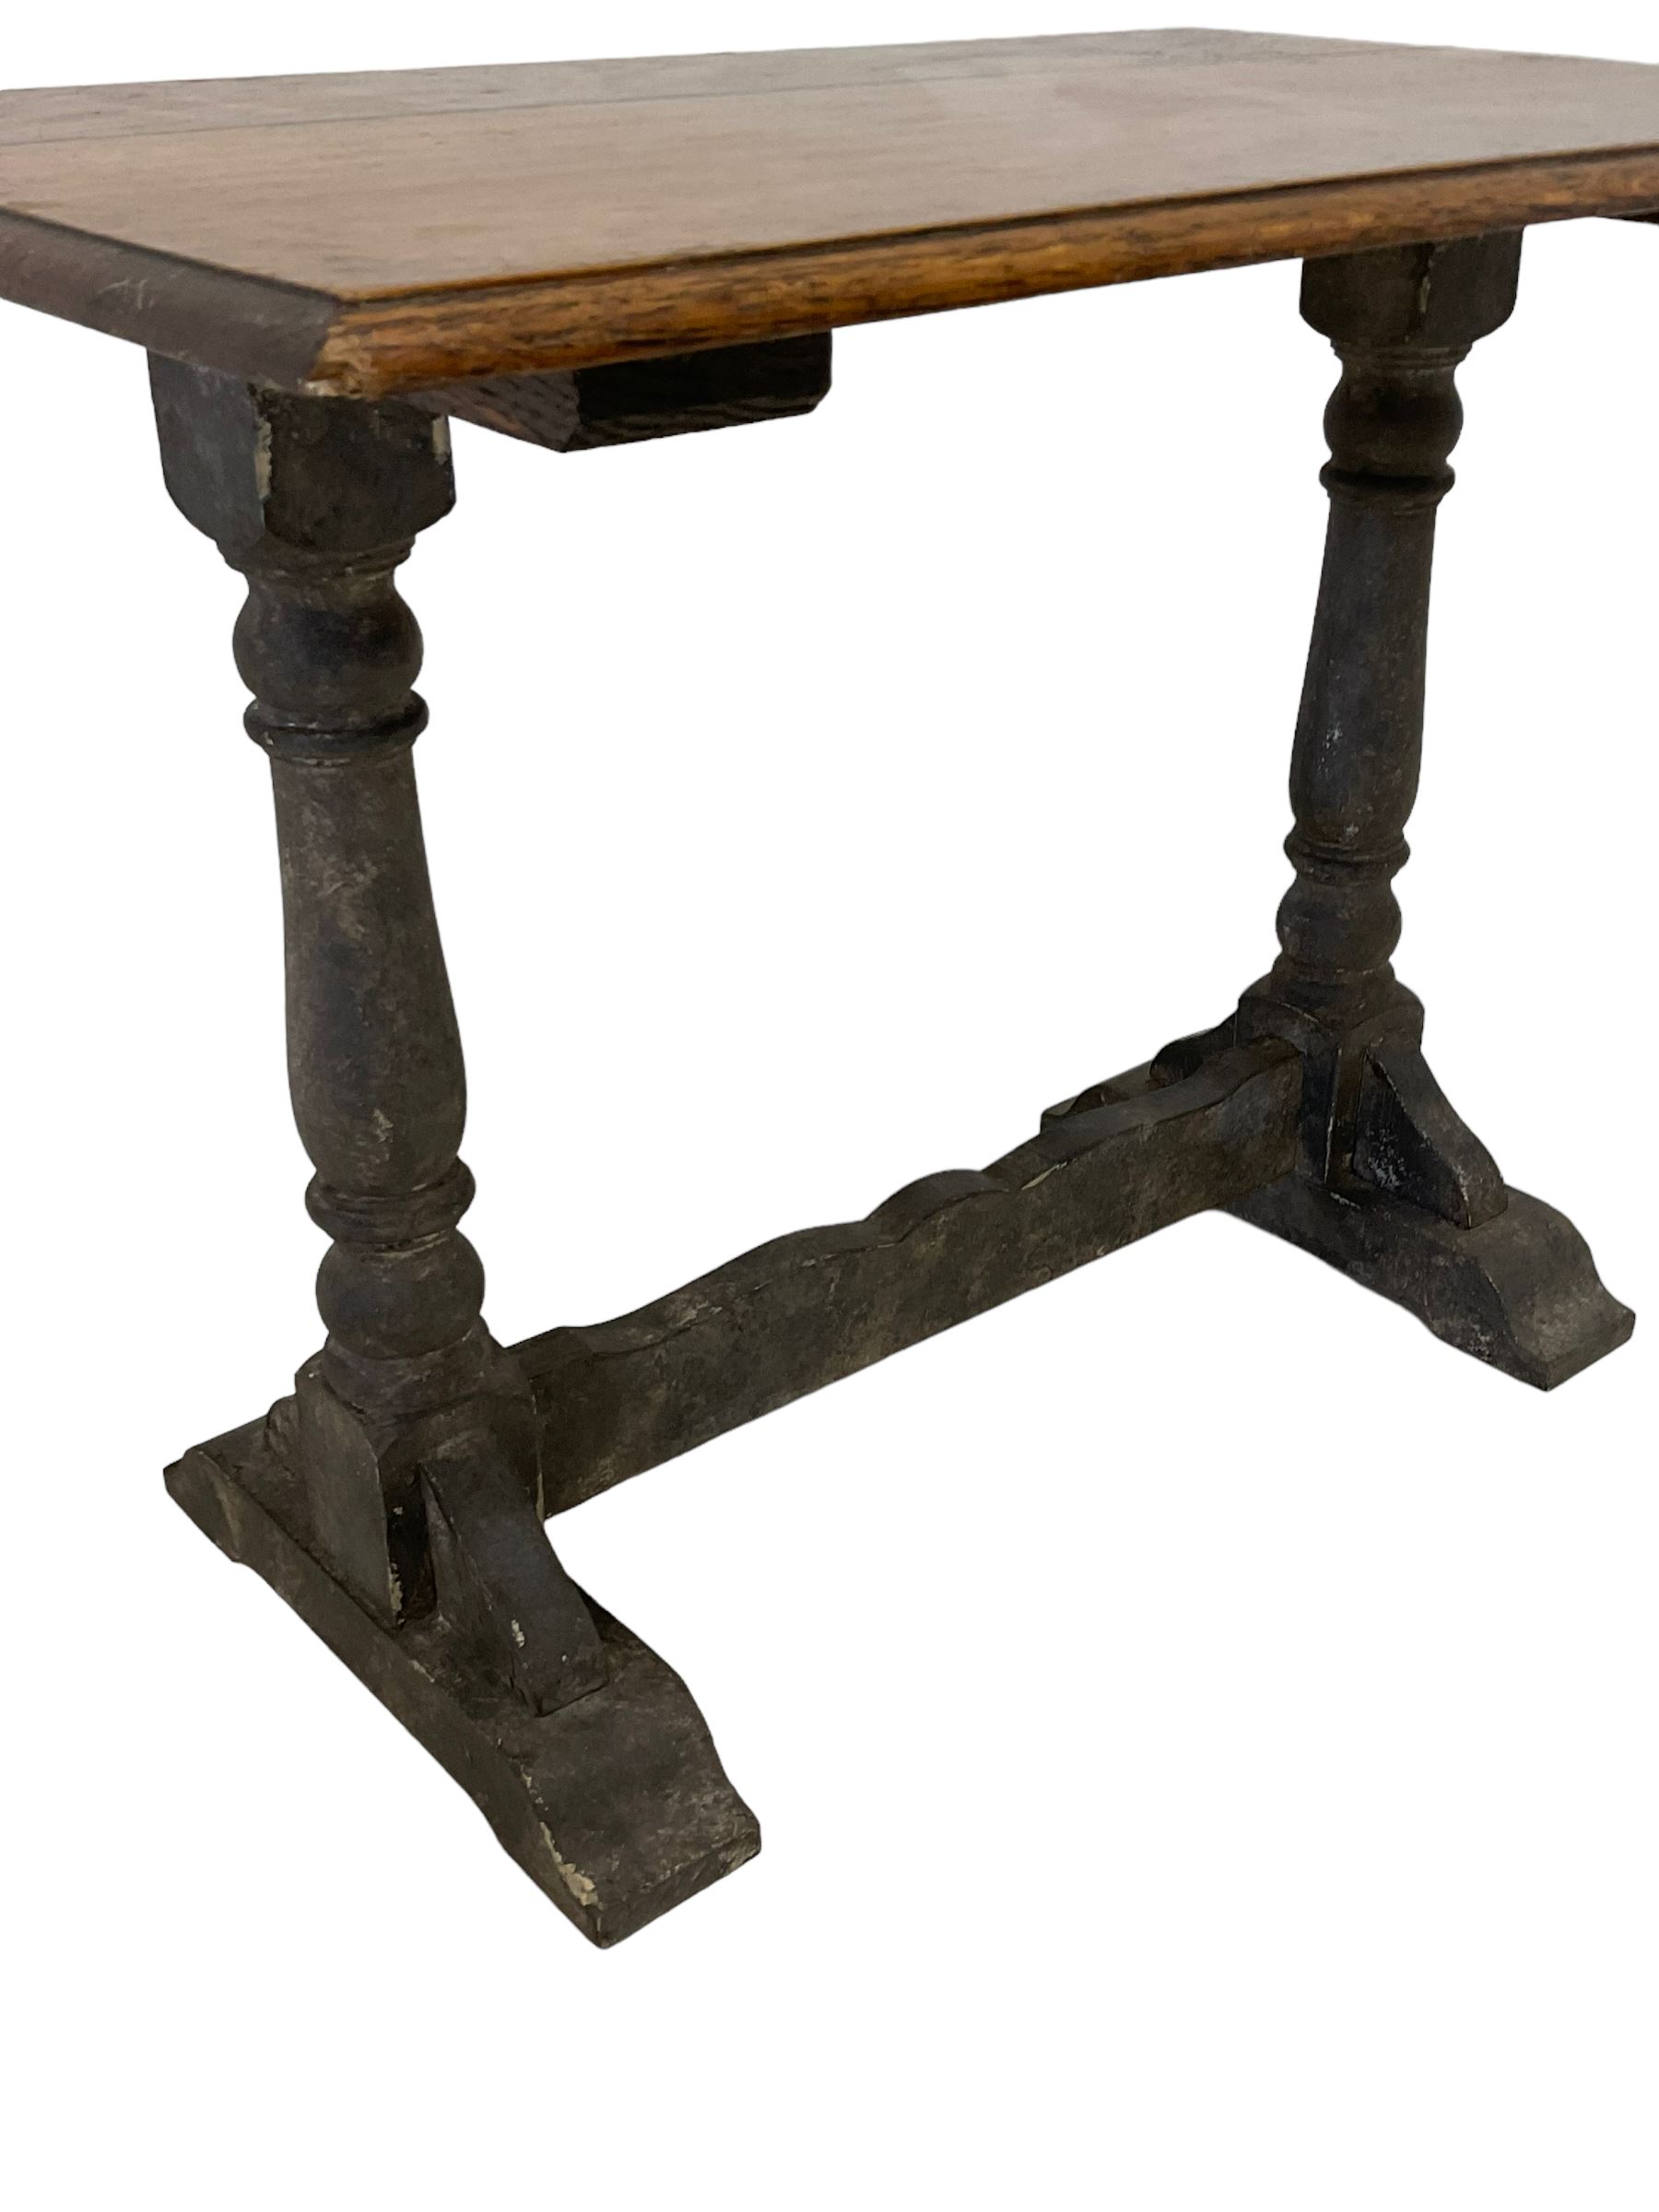 Small oak table - Image 2 of 3